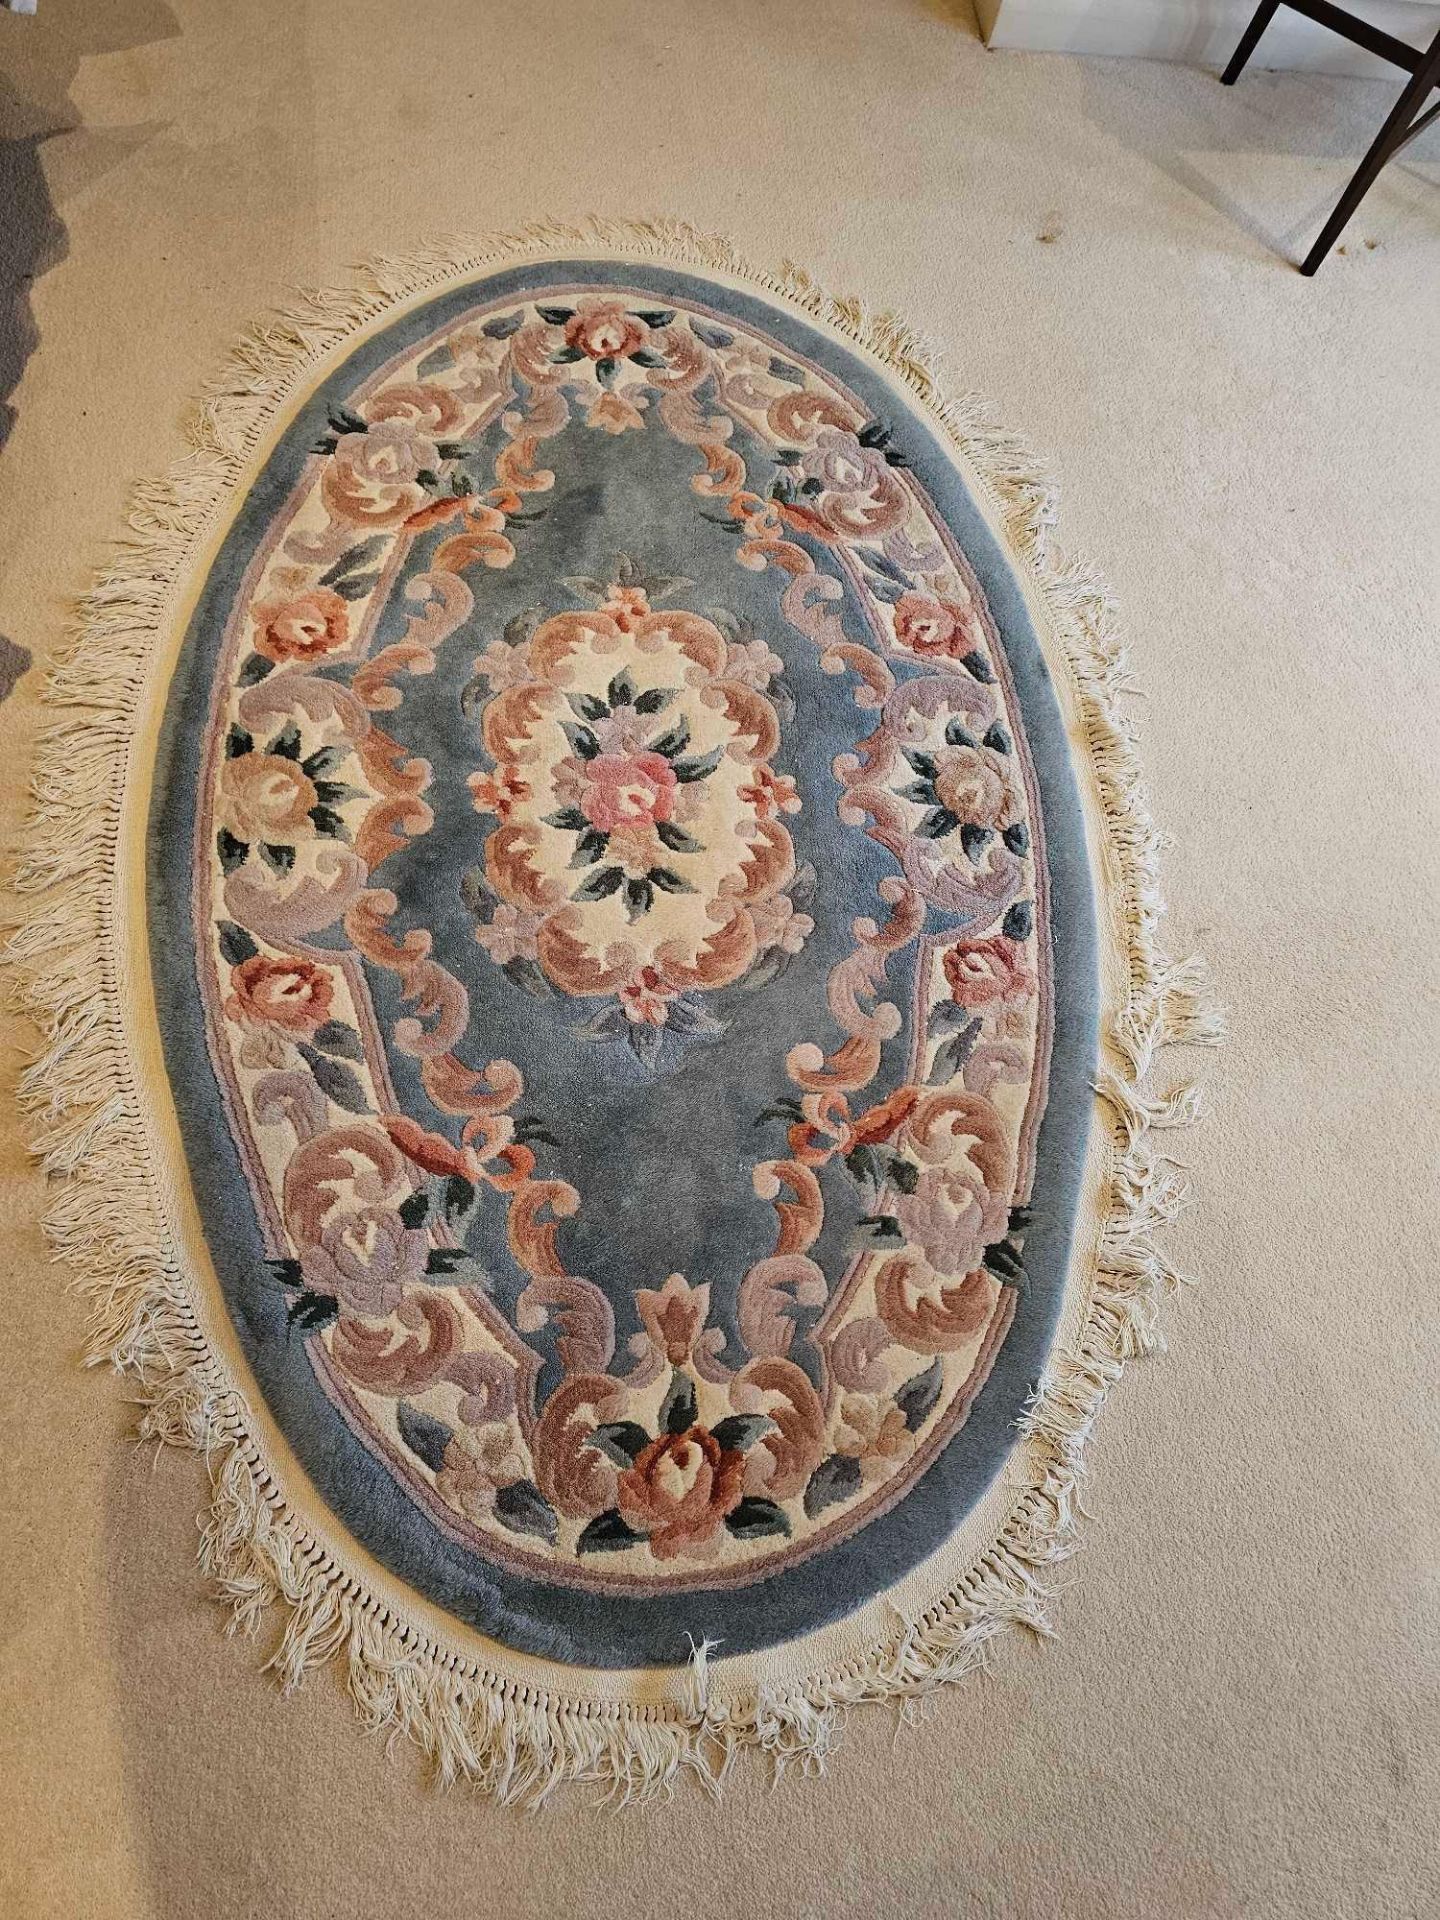 Oriental Collection Elegant Oval Floral Wool Rug With Fringe 160 X 100cm - Image 3 of 4